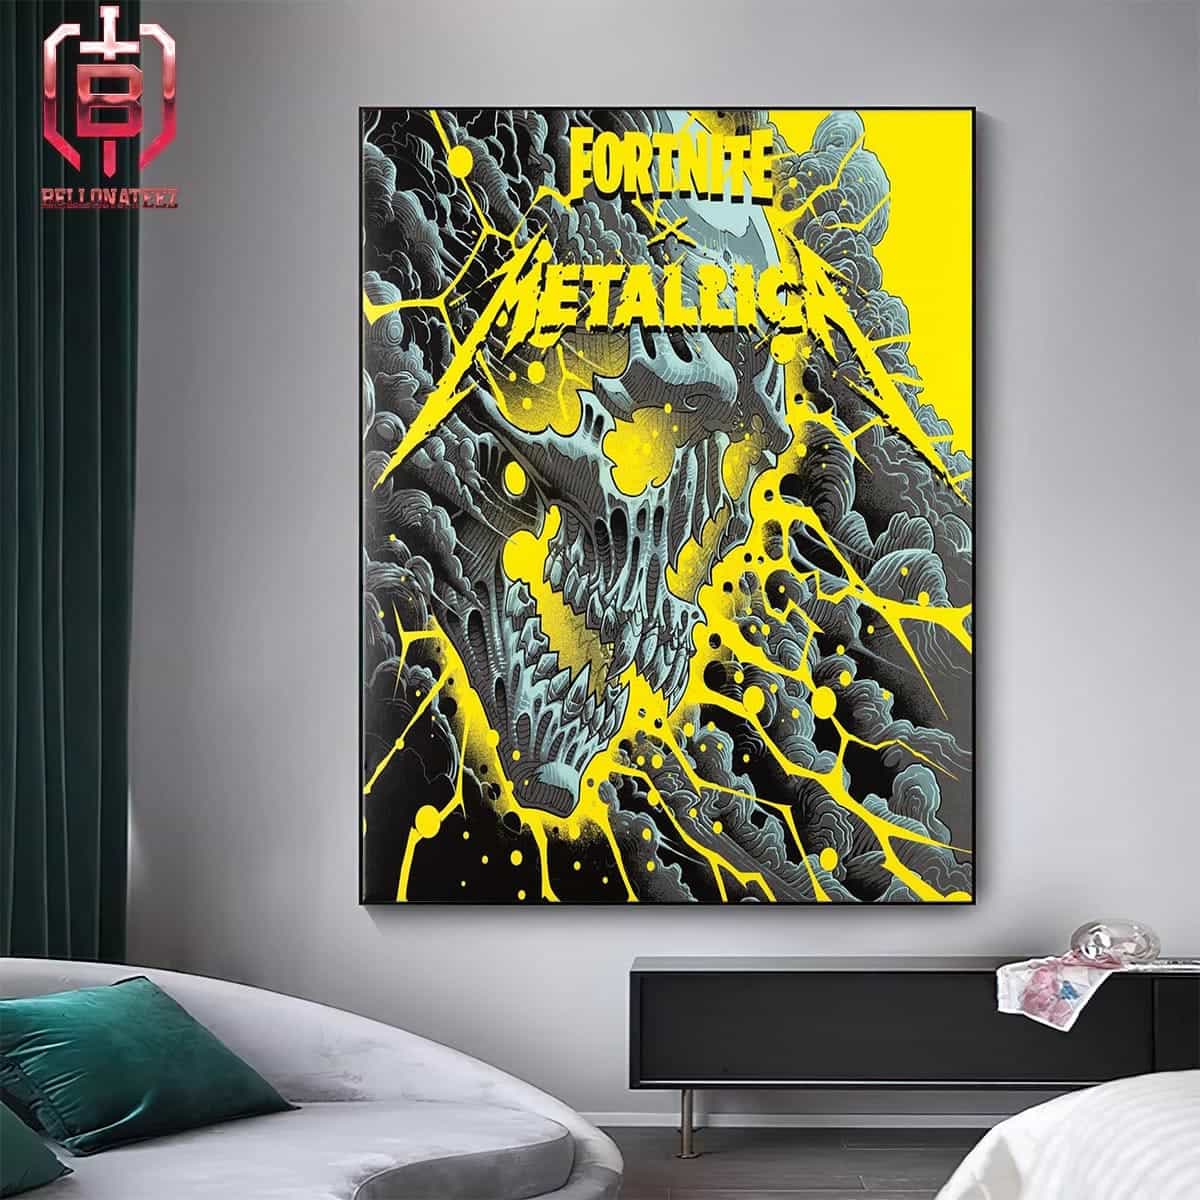 Metallica x Fortnite XBox Series x Console Cover Fan Gift Merchandise Limited Home Decor Poster Canvas